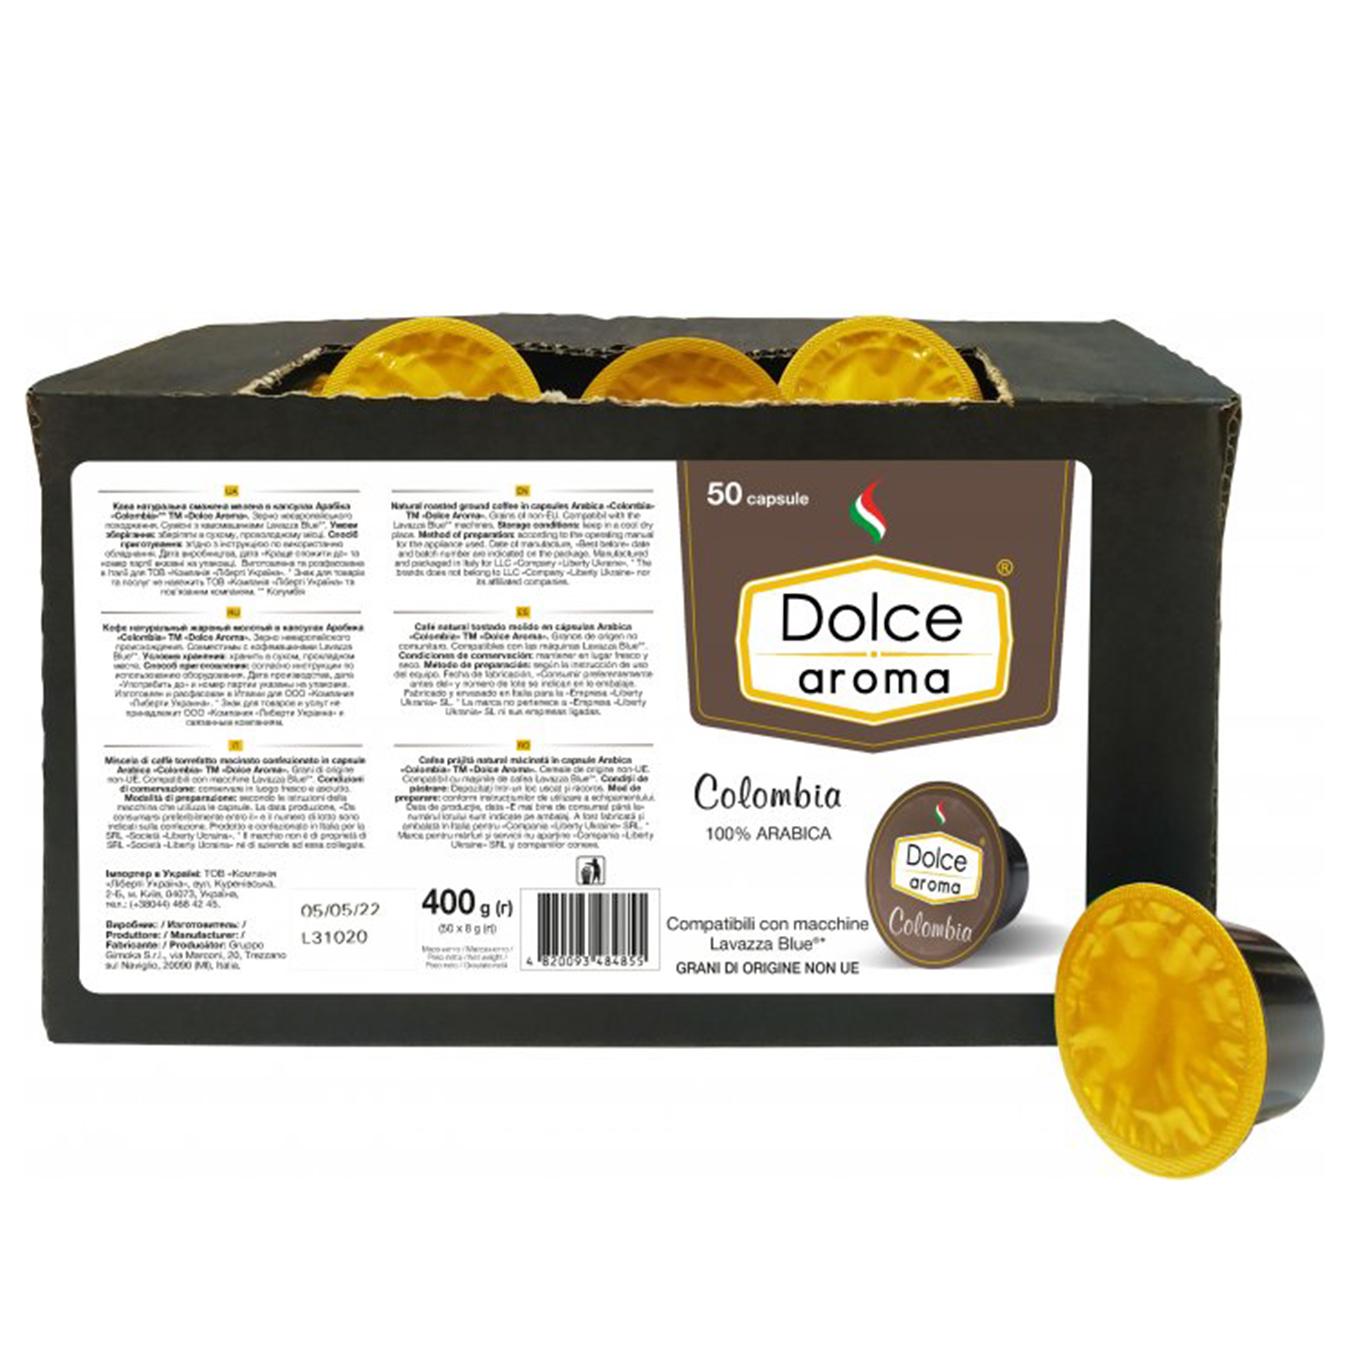 Coffee in capsules Dolce Aroma Colombia (Lavazza Blue) 50 pcs